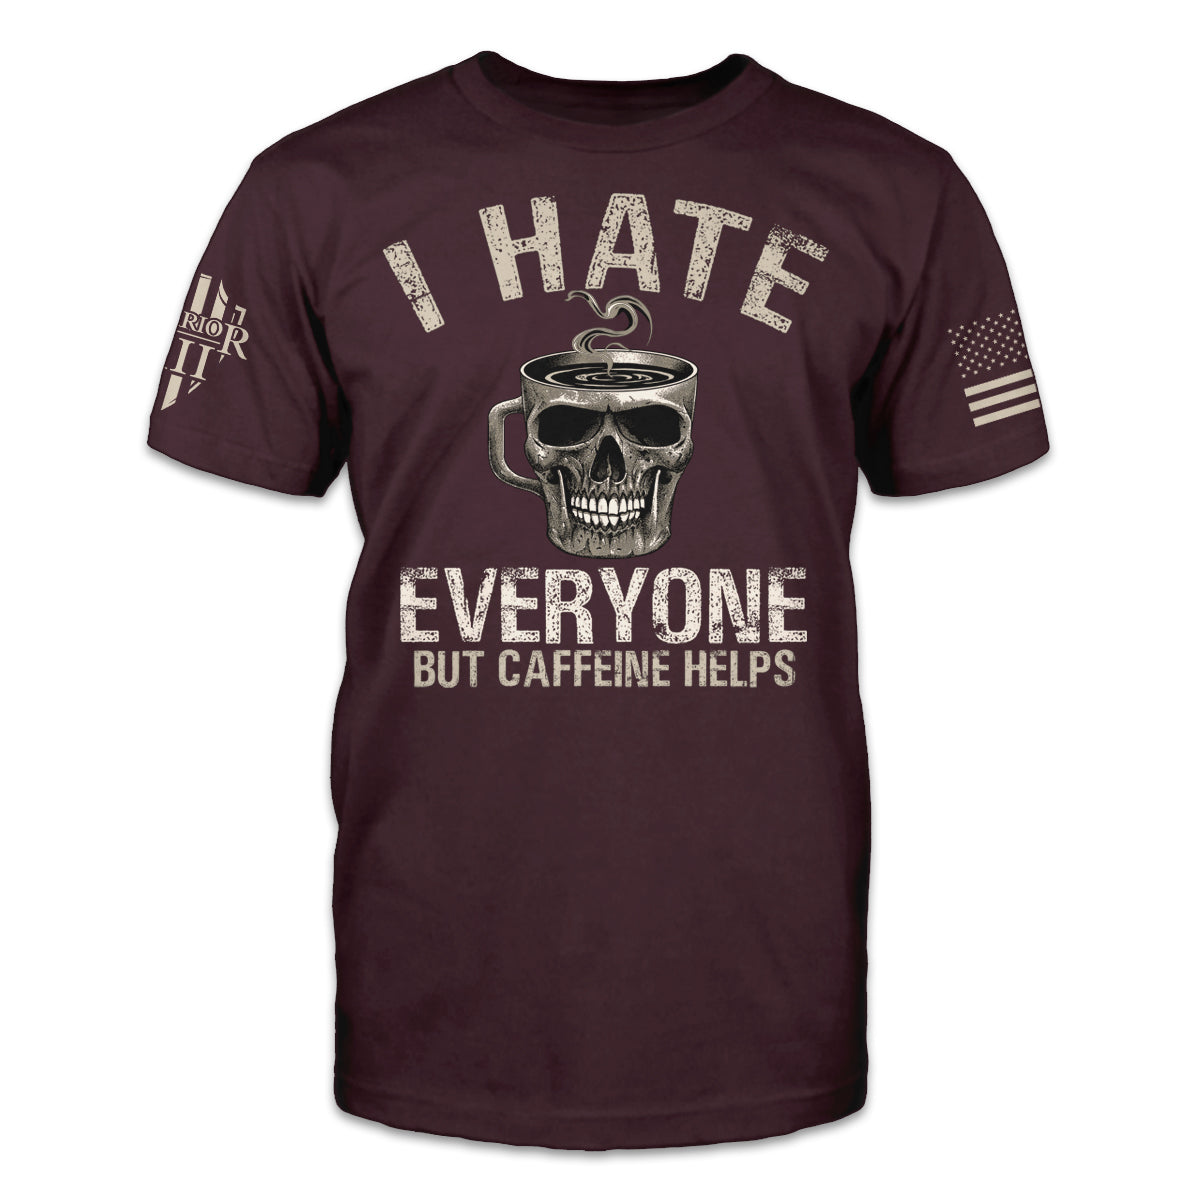 A burgundy t-shirt with the words "I hate everyone, but caffeine helps" with a skull coffee cup printed on the front of the shirt.